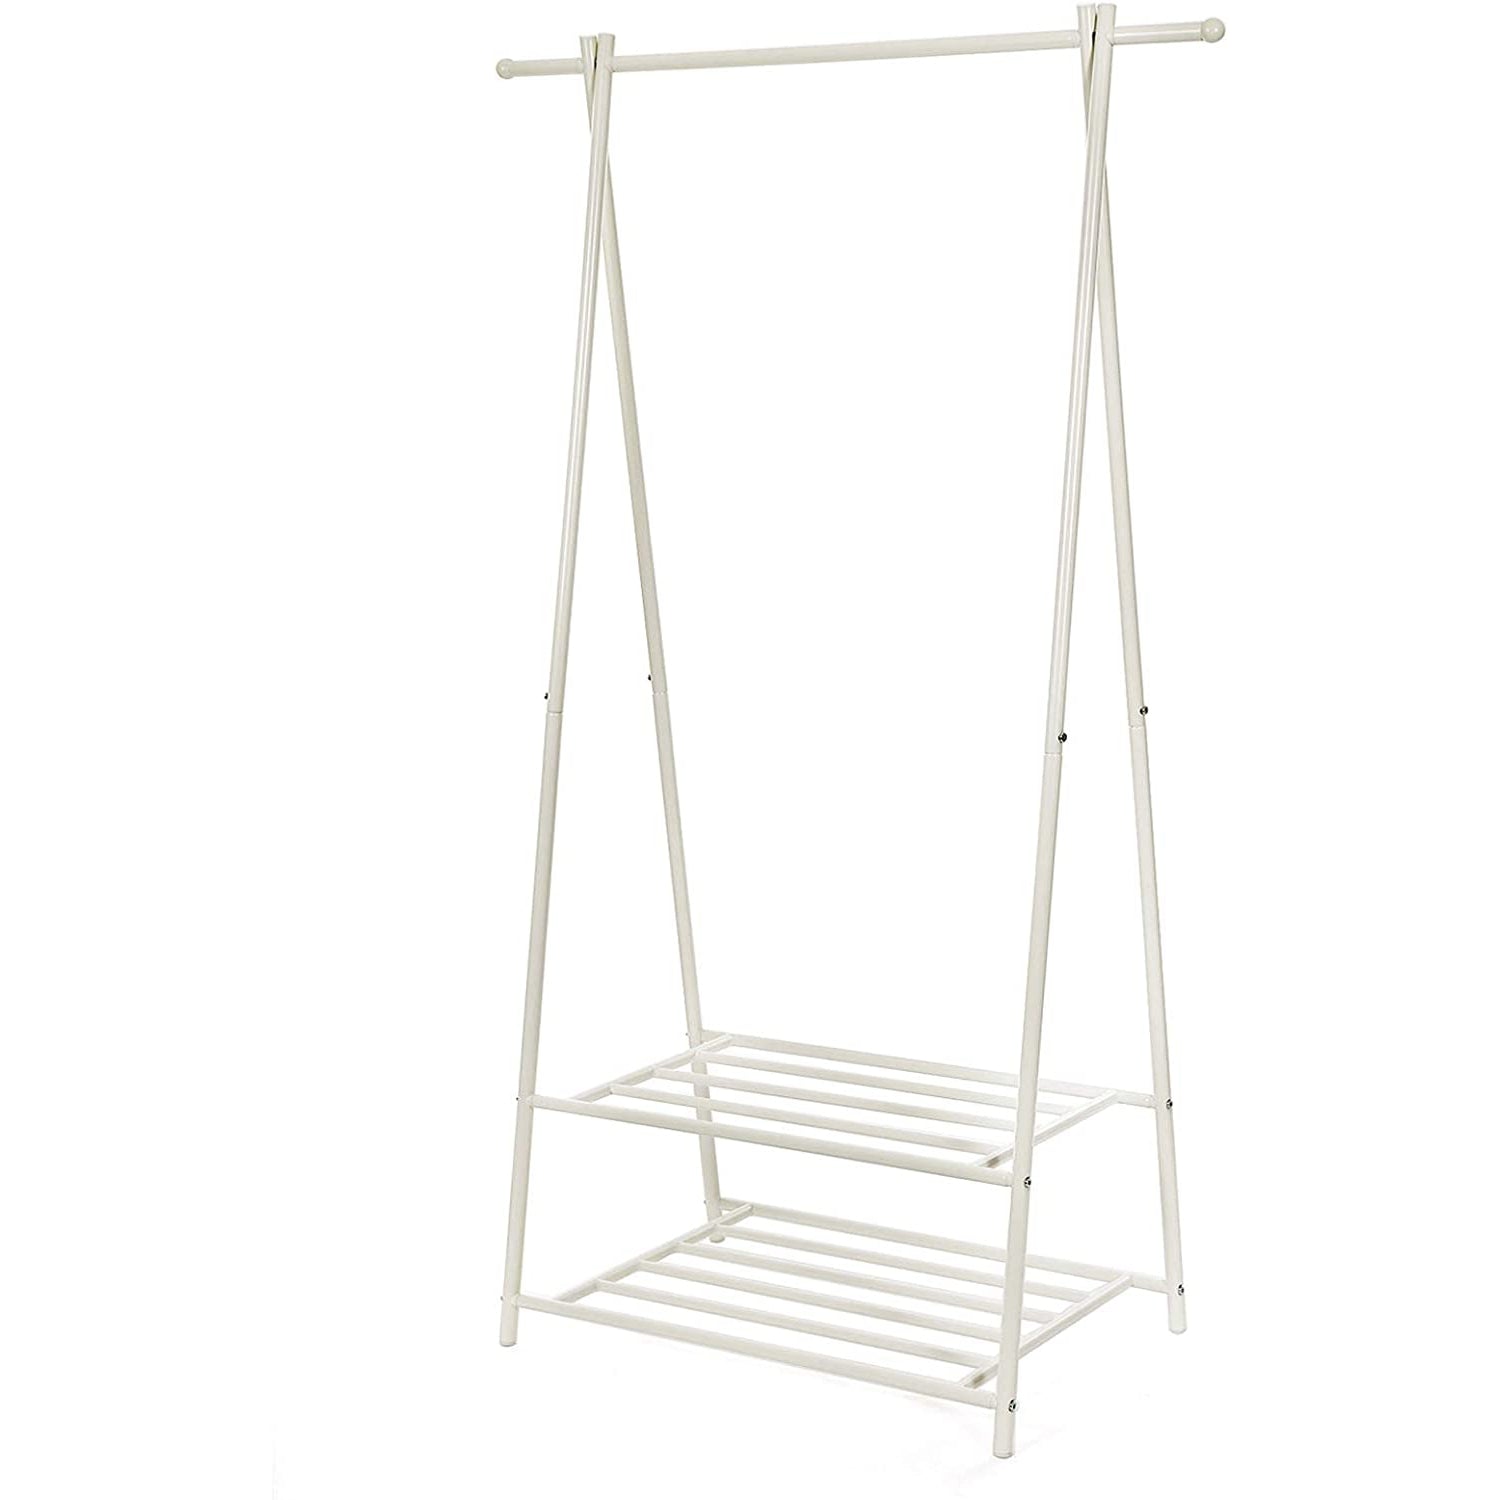 Nancy's Clothes Rack - Clothing Stand With Shoe Rack - White - 83 x 41.5 x 6.4 cm